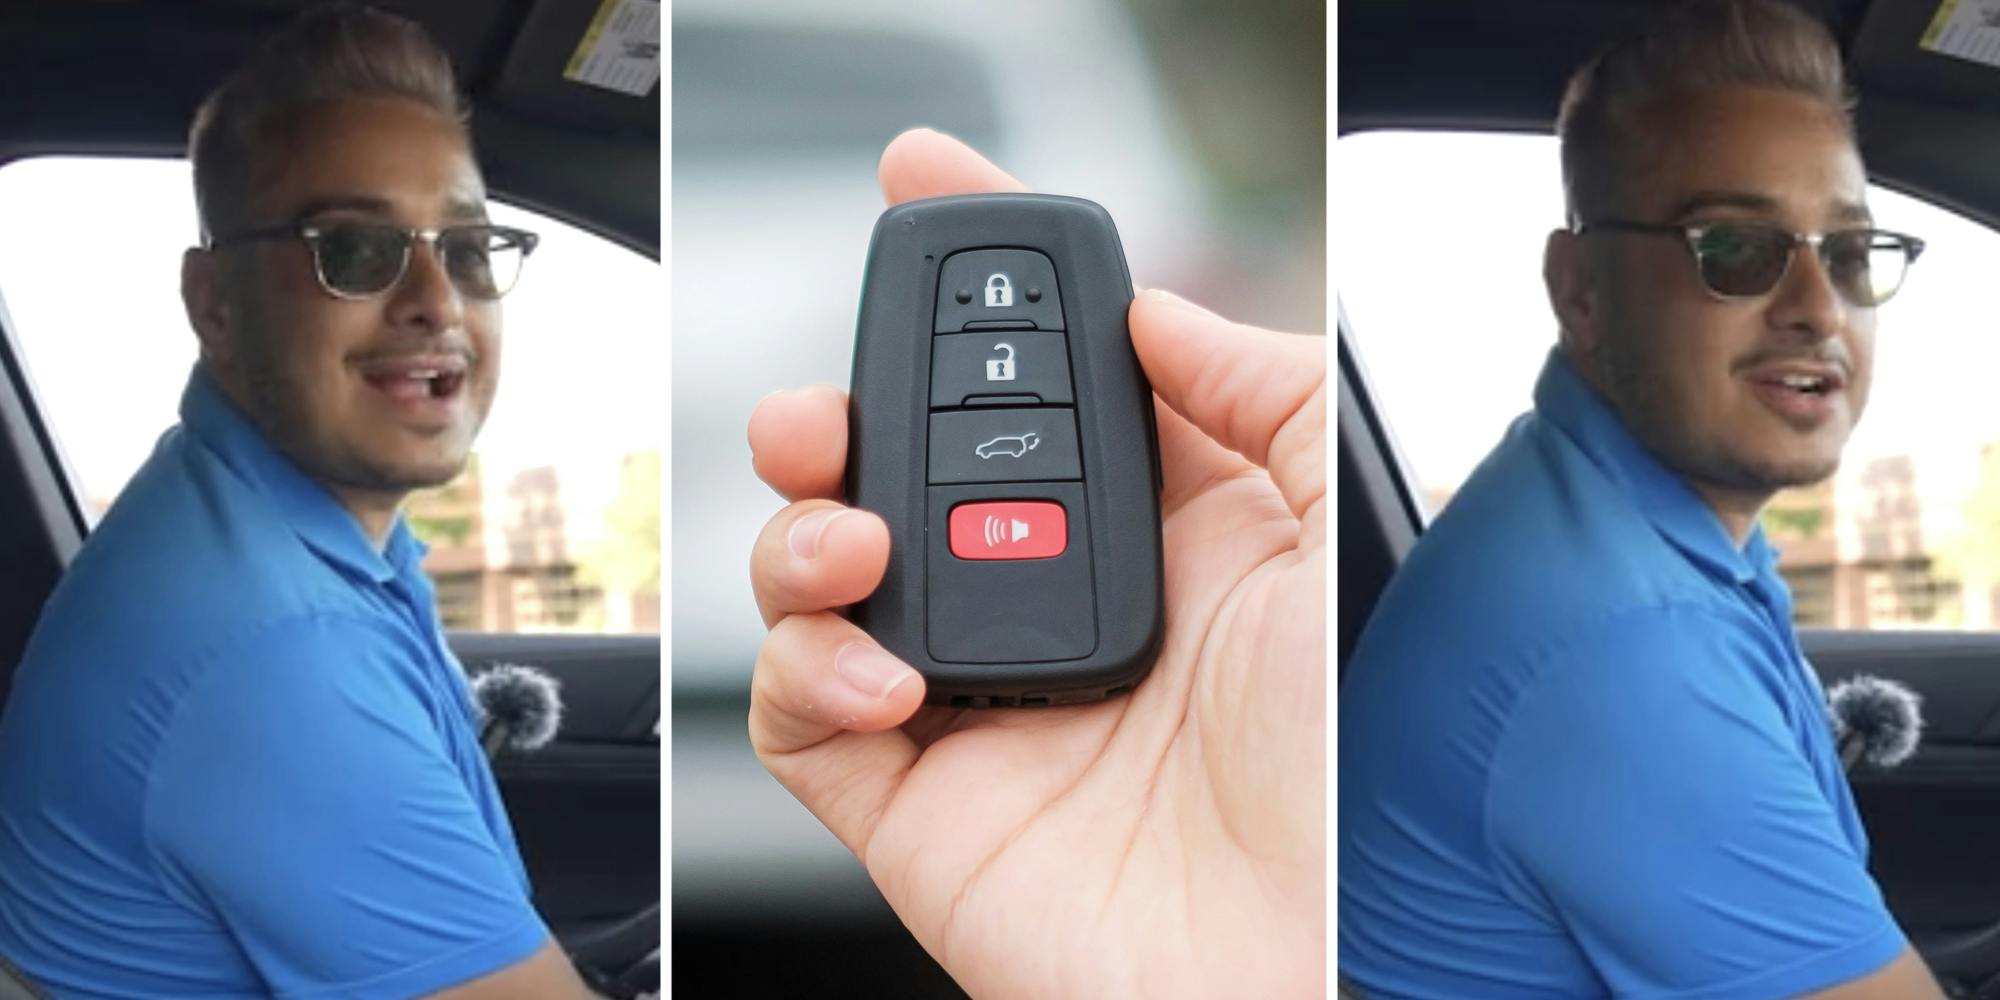 ‘If you’re ever stuck with a car that does not start’: Car expert shows how to start your car with a dead key fob - The Daily Dot